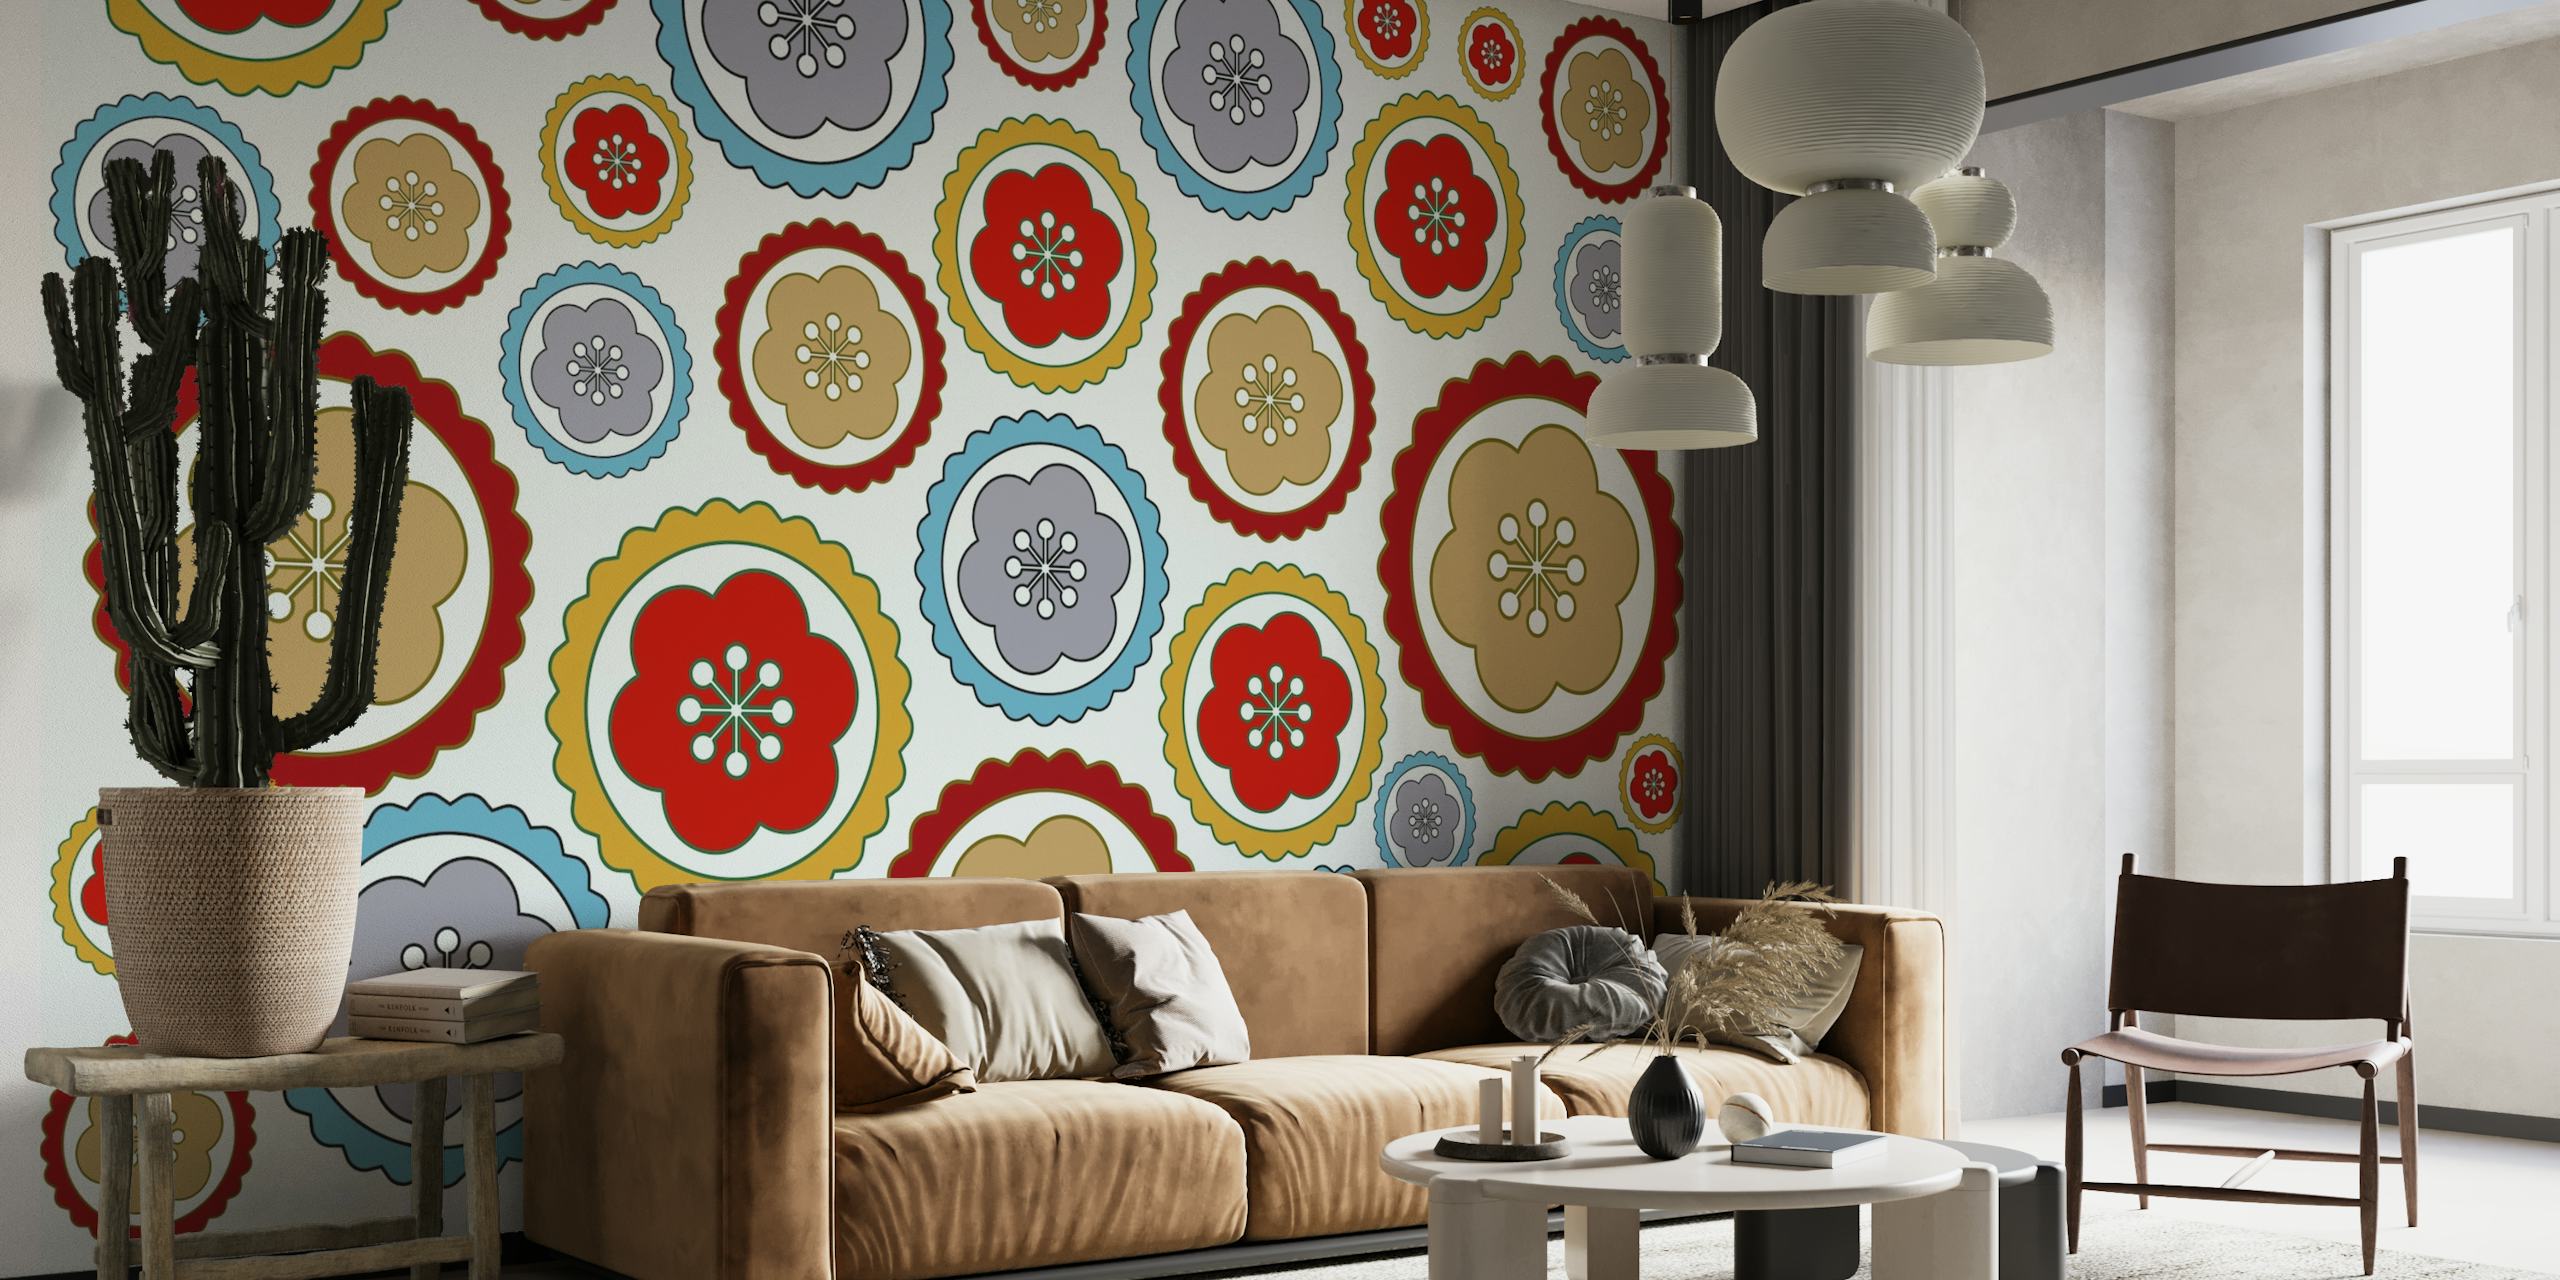 Colorful retro-style daisy pattern wall mural for a vintage decor theme